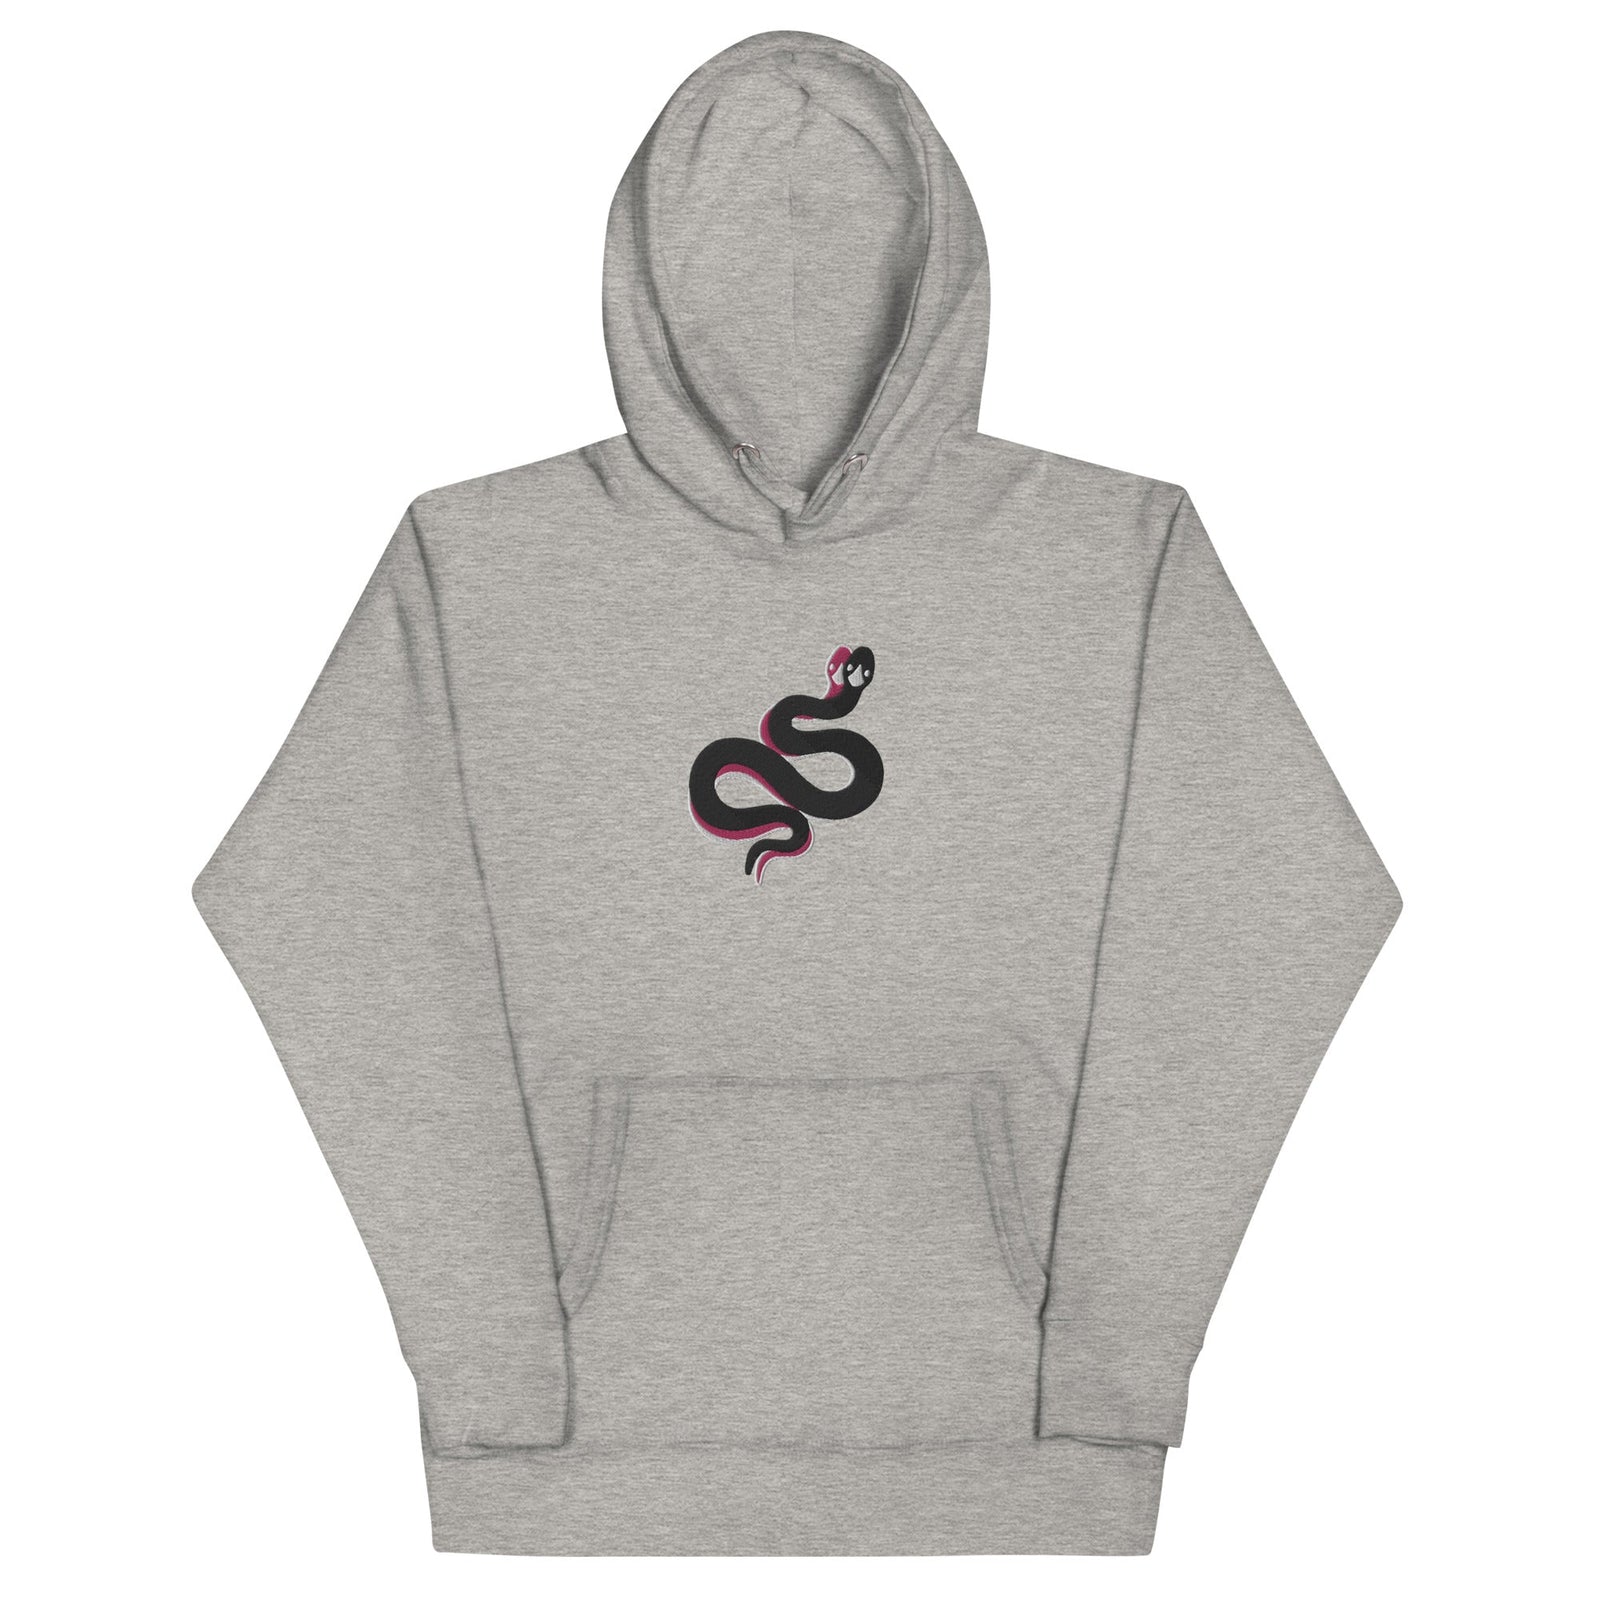 Witchy Snake - Unisex Hoodie-Hoodies-Carbon Grey-linaliva.de